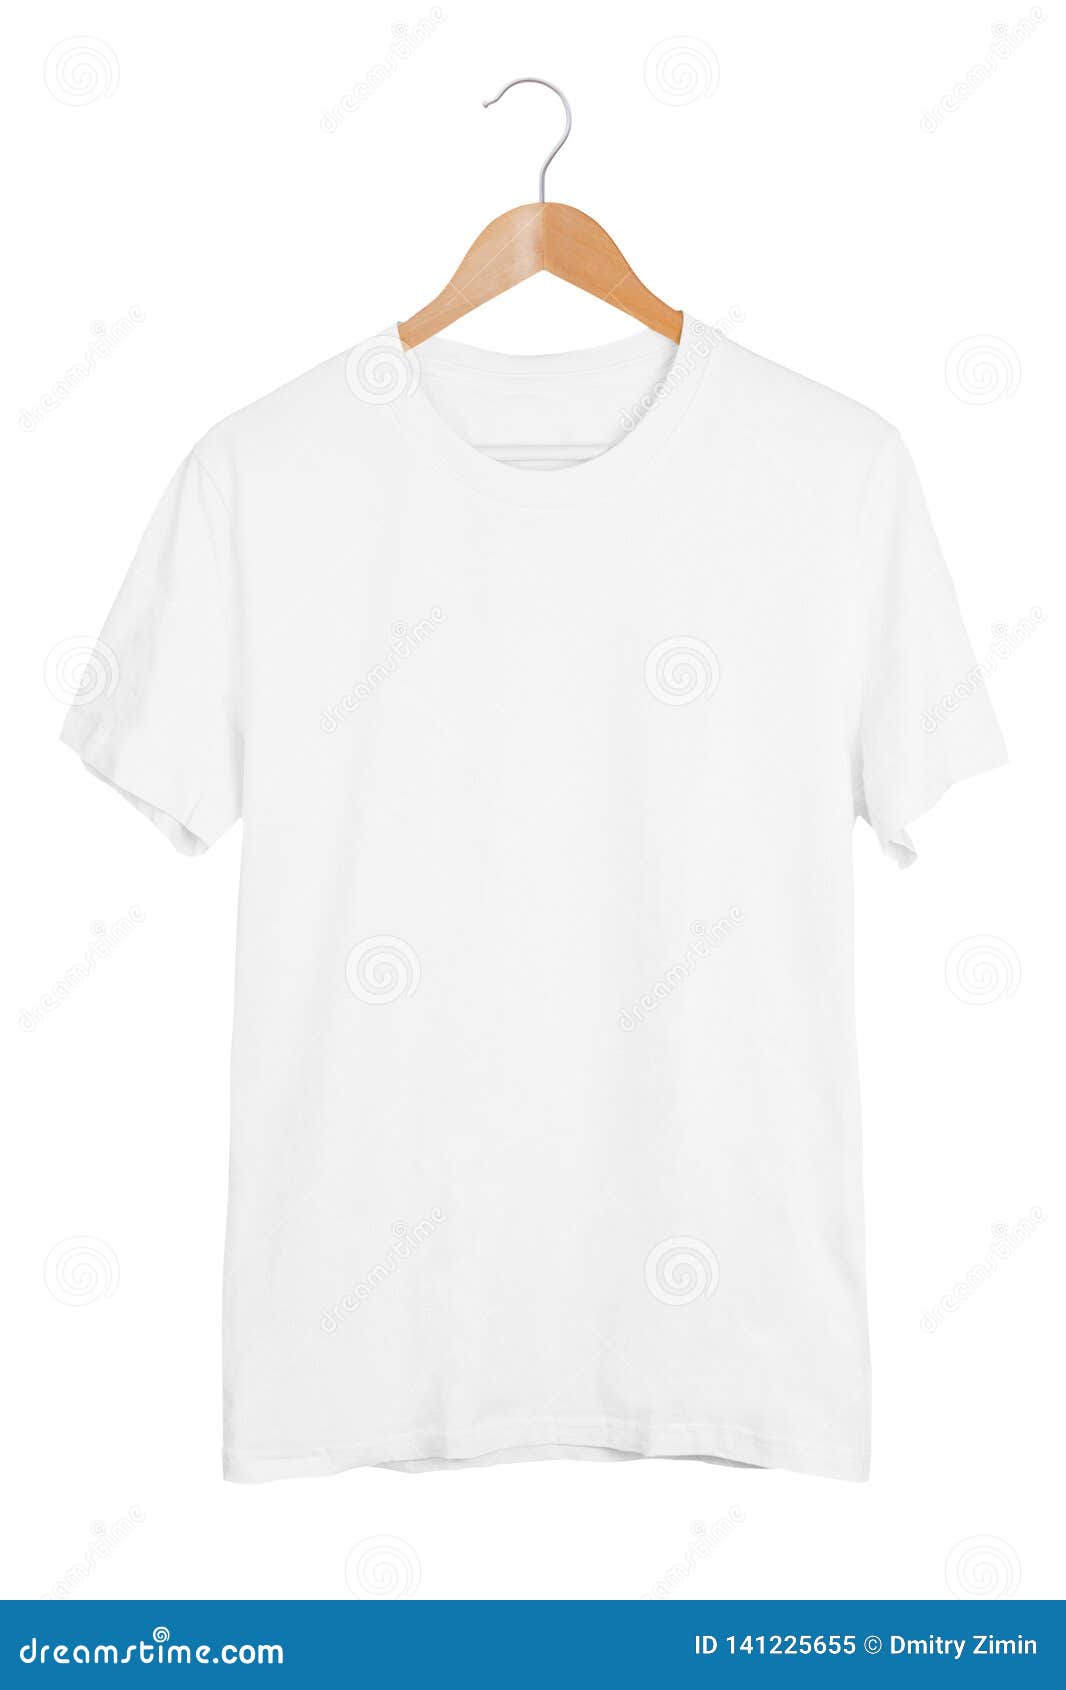 Download 1 807 Clothing Hanger Blank Shirt Photos Free Royalty Free Stock Photos From Dreamstime